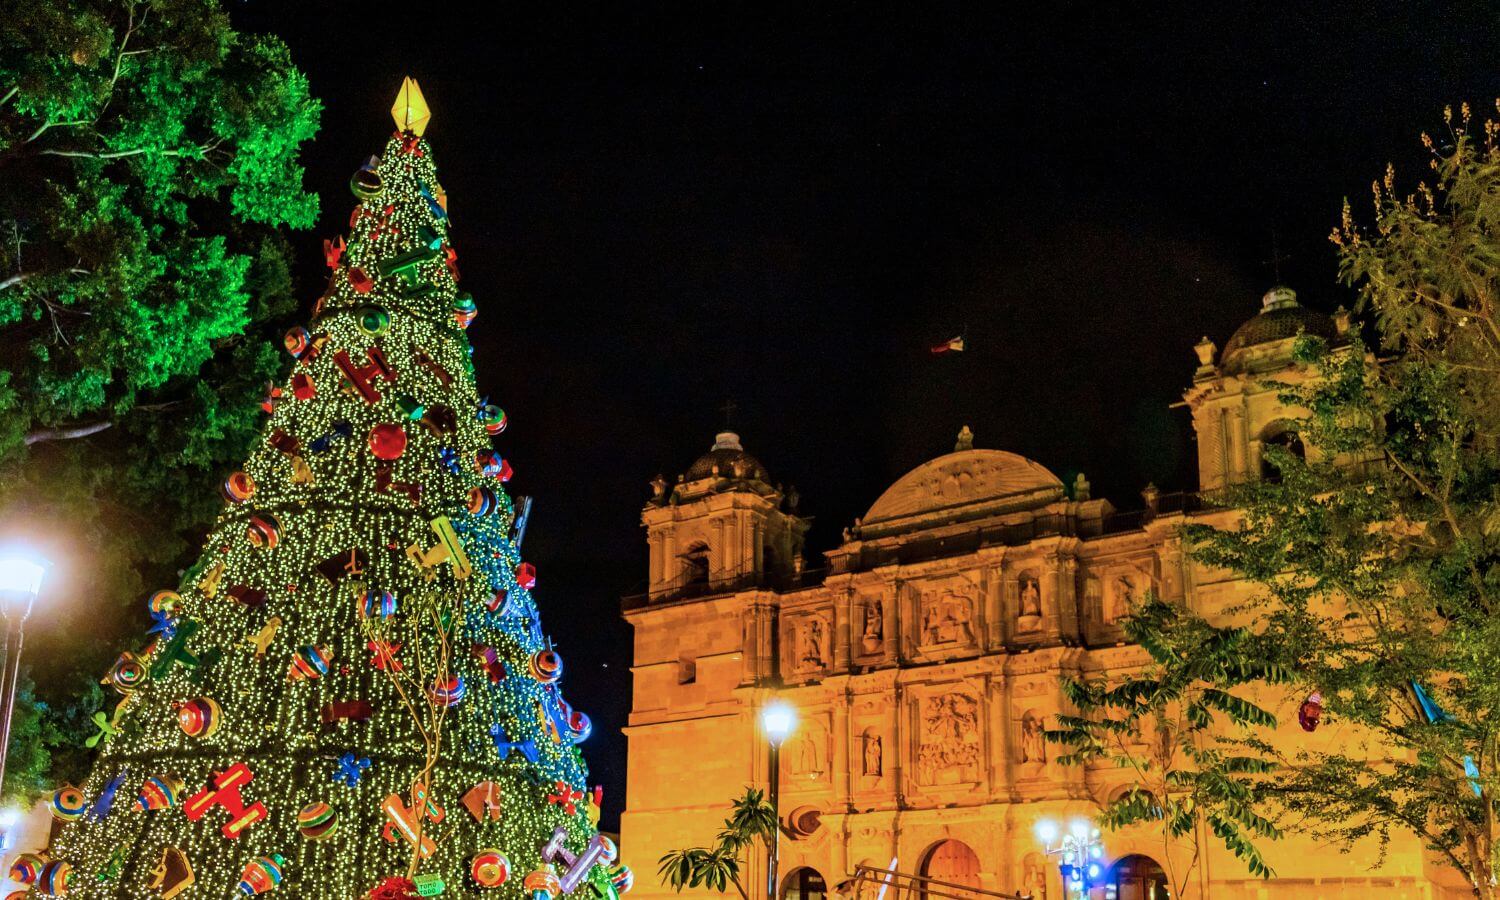 Christmas Tree in a Zocalo (town square) in Mexico